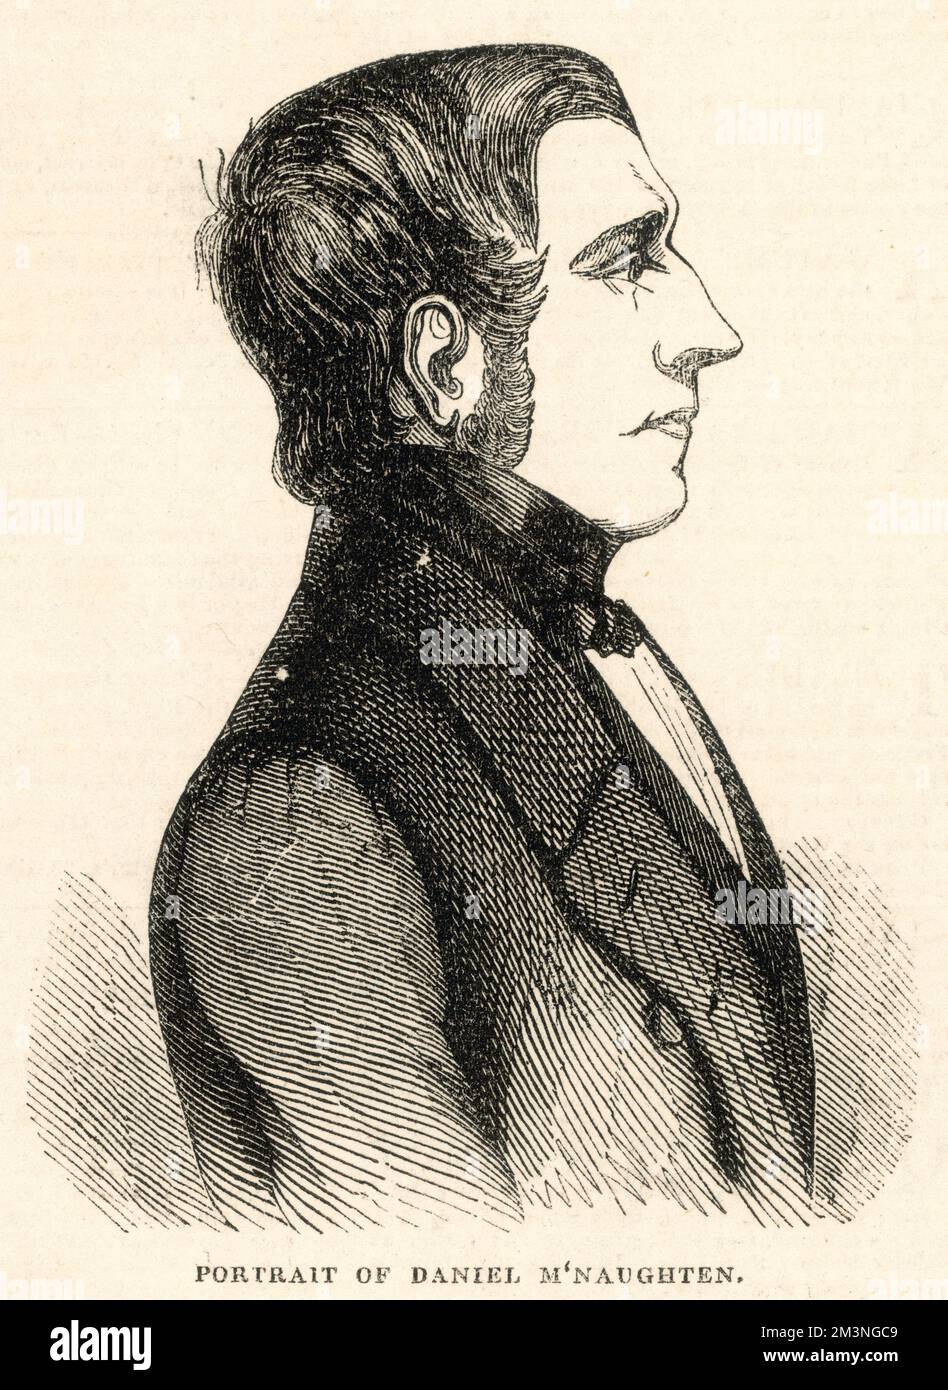 Daniel McNaughten (or M'Naughten), (1813 - 1865), Scottish woodturner who assassinated English civil servant Edward Drummond while suffering from paranoid delusions. Through his trial and its aftermath, he has given his name to the legal test of criminal insanity in England and other common law jurisdictions known as the M'Naghten Rules.     Date: 1843 Stock Photo